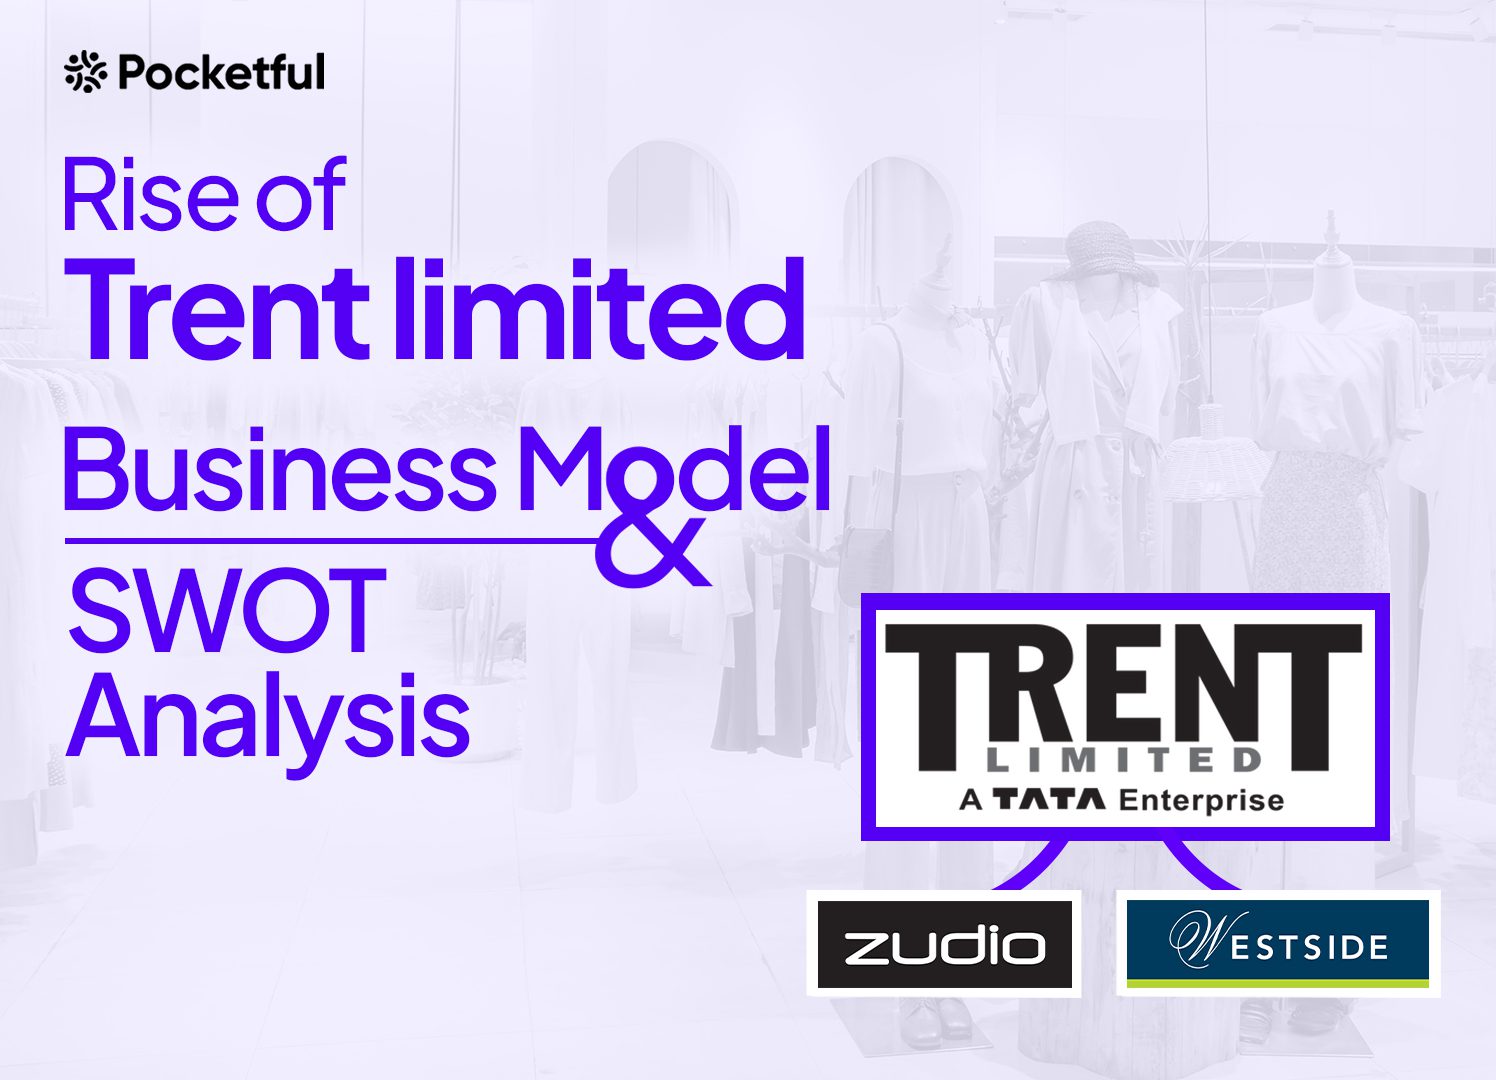 Case Study on Trent Limited: Financials, Business Model, Marketing Strategies, and SWOT Analysis